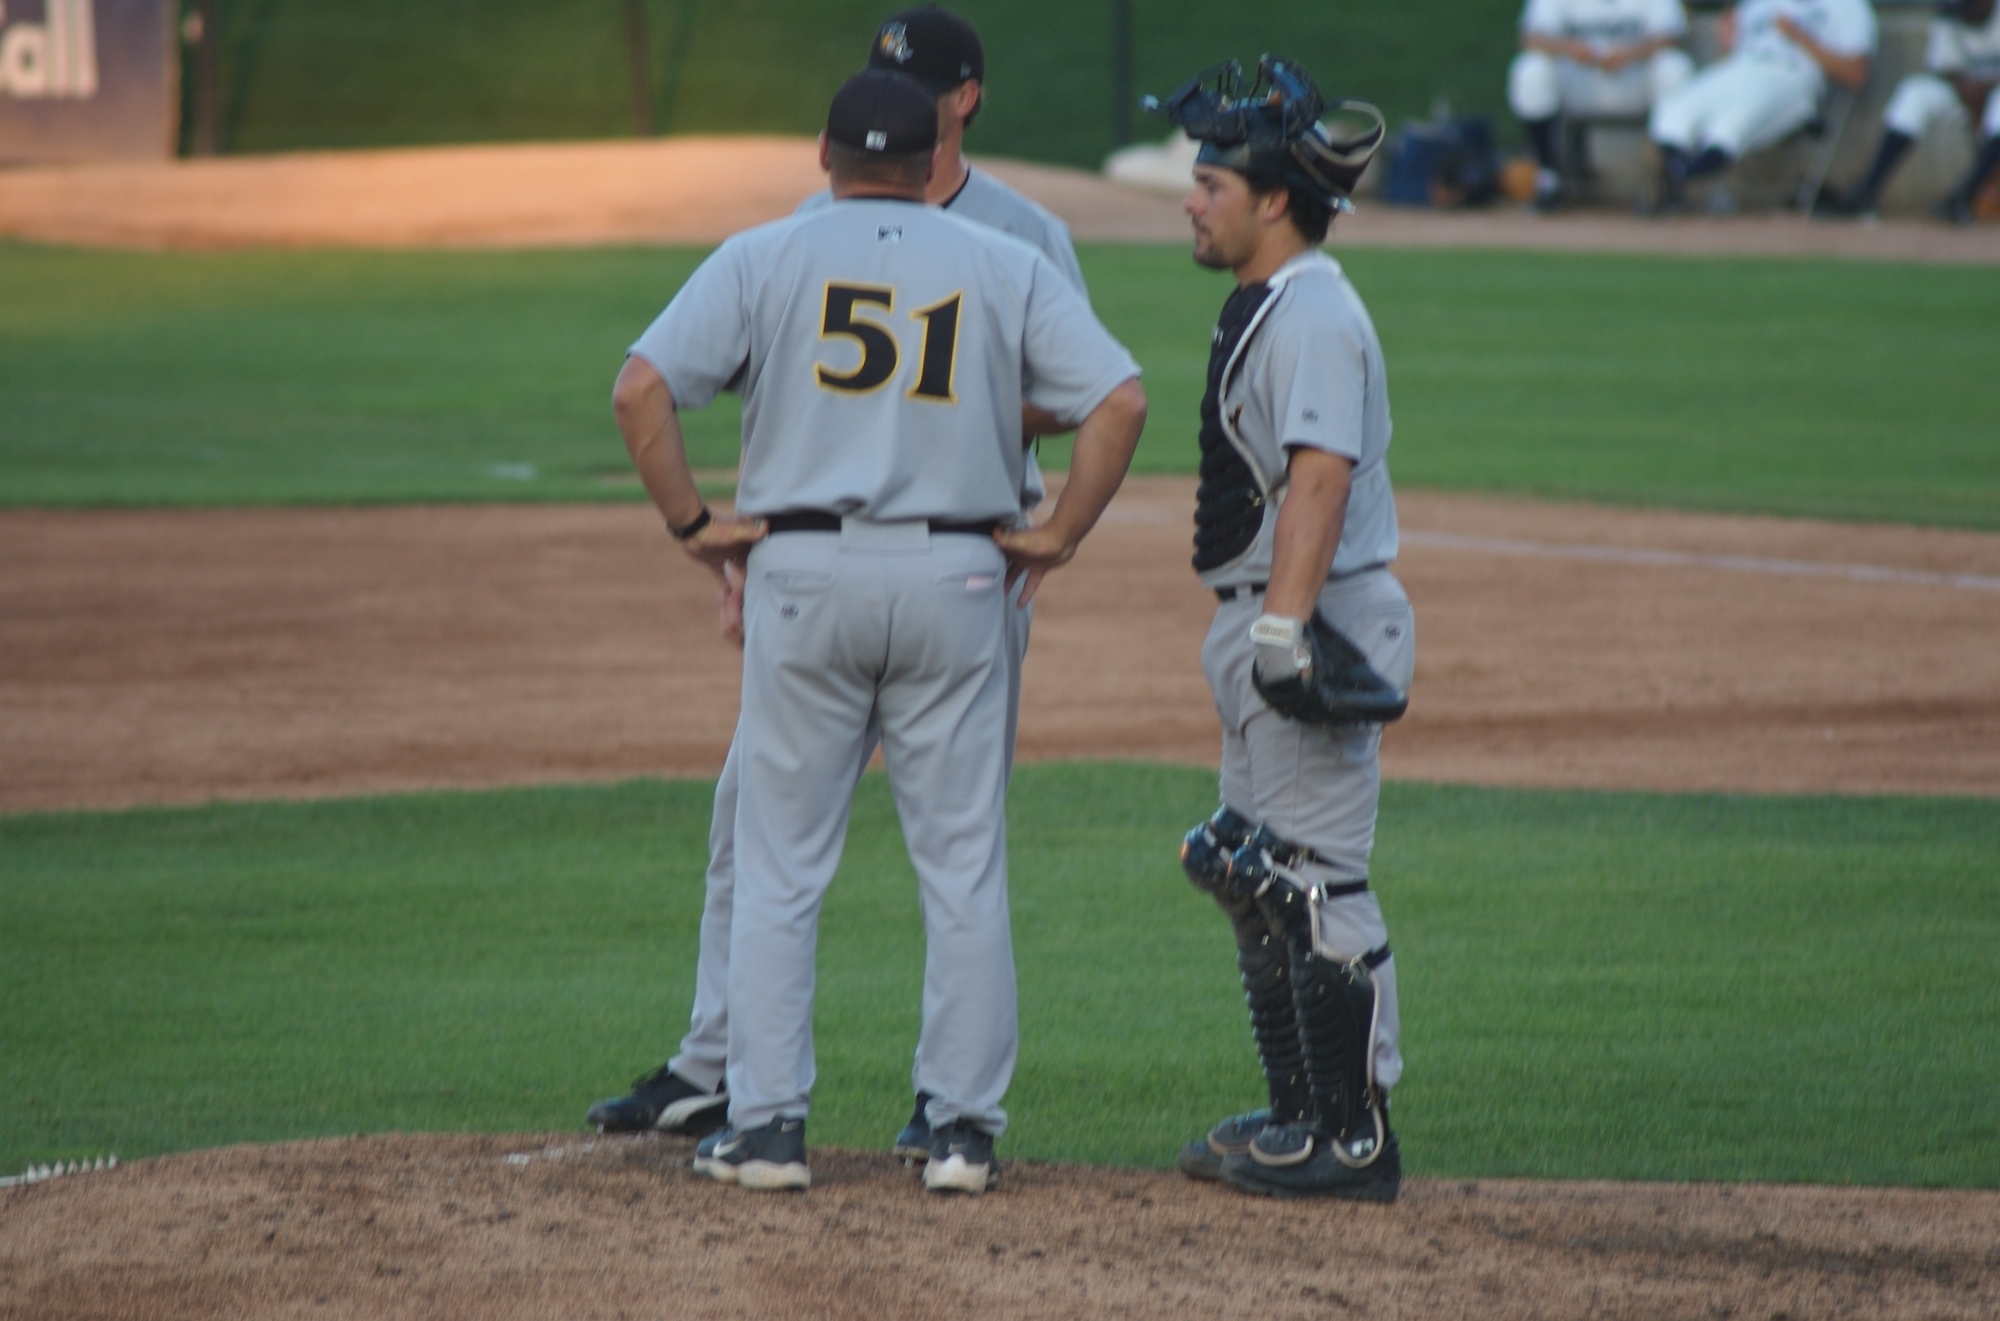 two baseball players talking on the field during a game